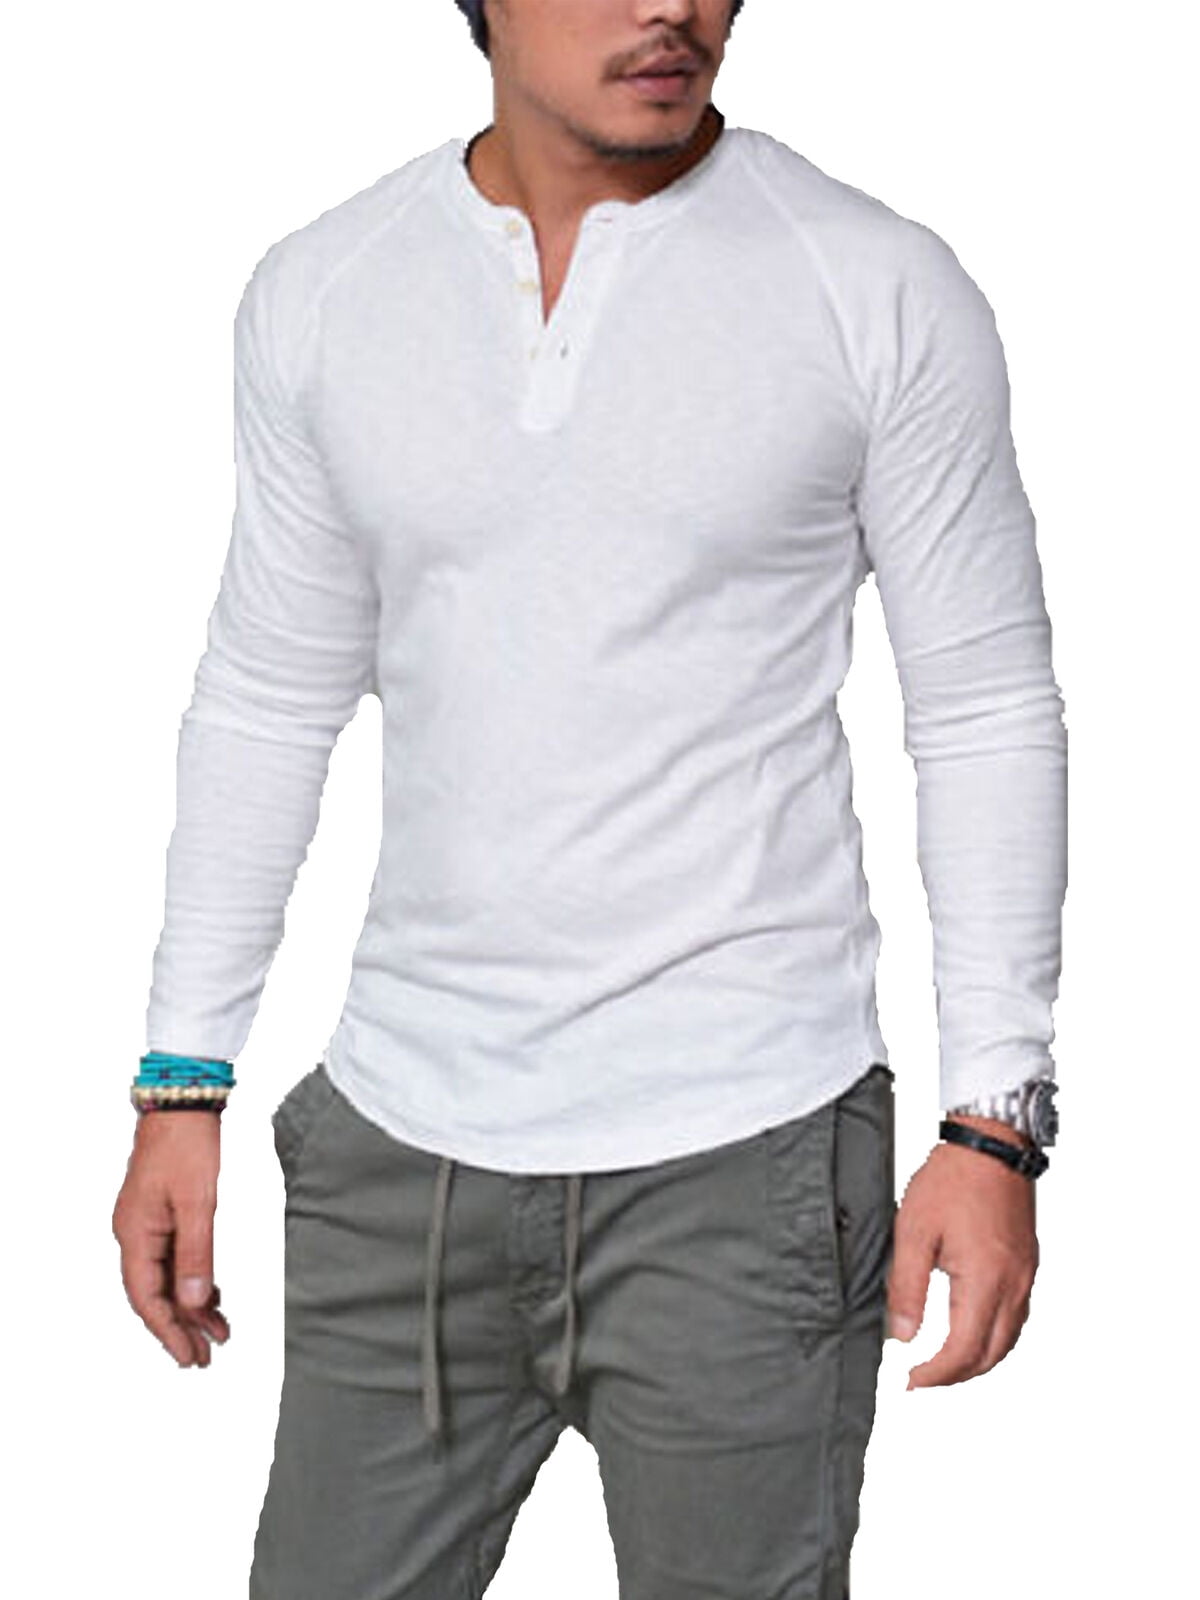 Mens Casual Polo Shirt Slim Fit V-neck Tee Long Sleeve Top T-shirt Blouse Sizes 